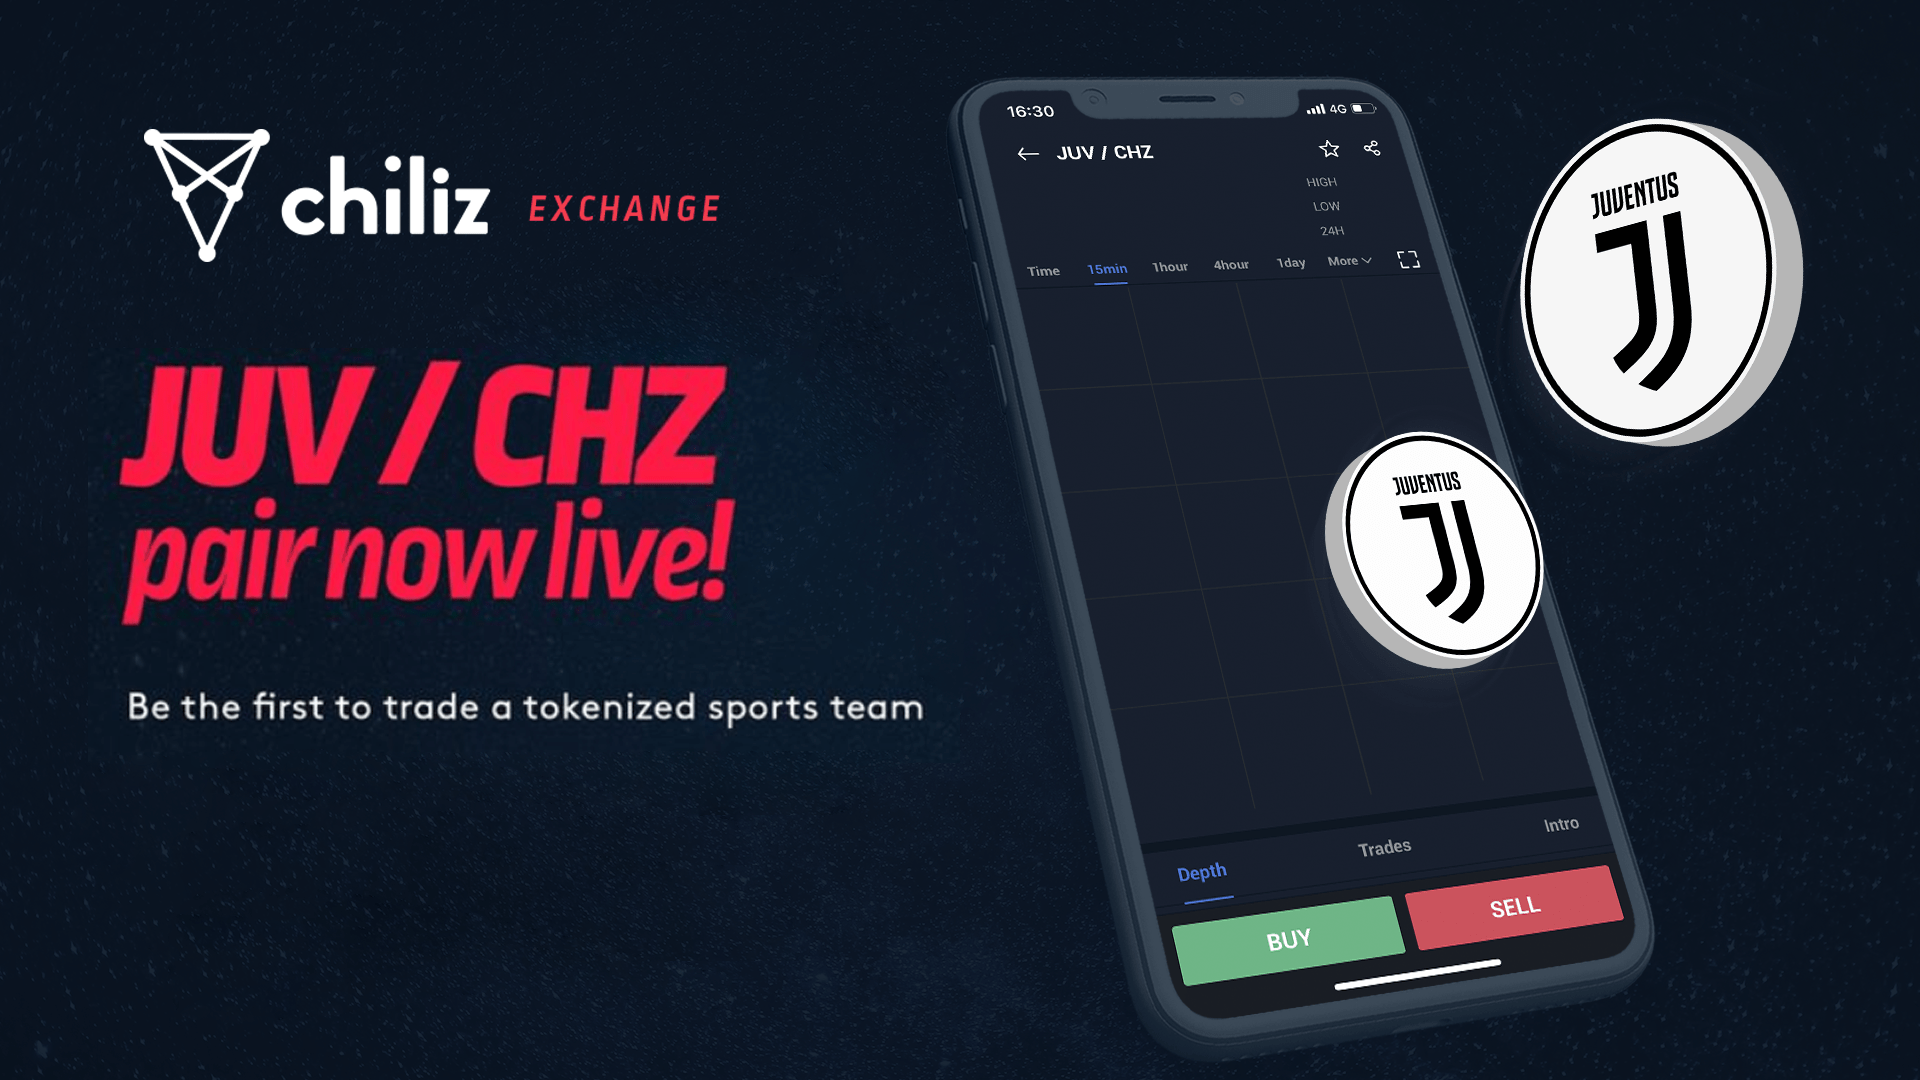 Chiliz Announces the Launch of JUV Fan Token Trading